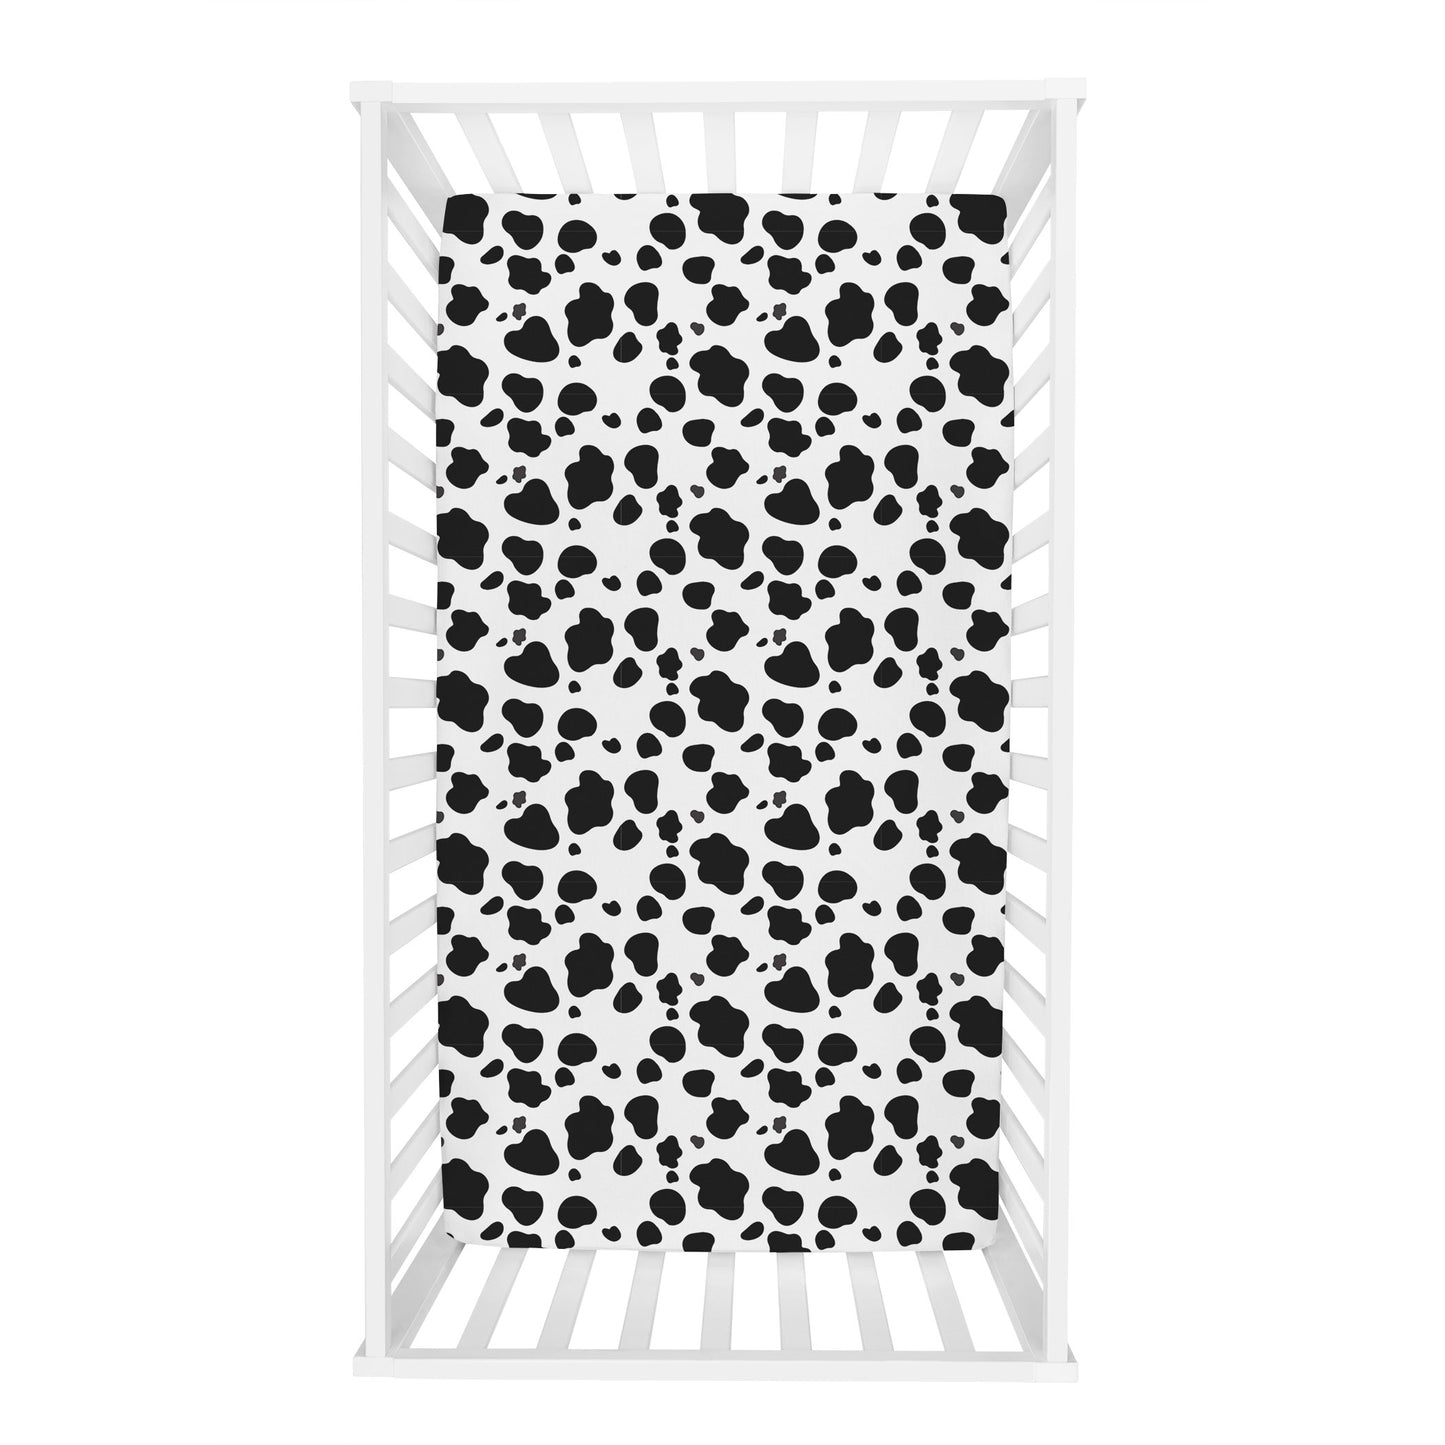  Black & White Cow Print Deluxe Flannel Fitted Crib Sheet - overhead view